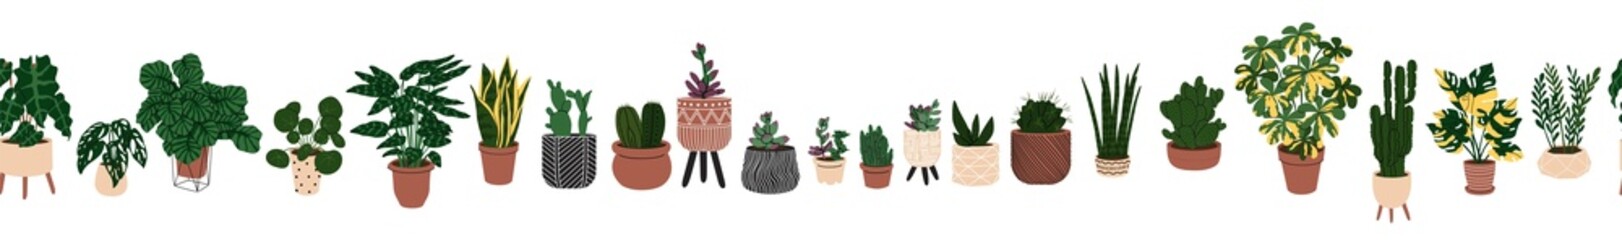 Seamless border with room plants in the pots. Web or Interior design. Modern Home plants. Flat style in Vector illustration. Isolated on transparent background.